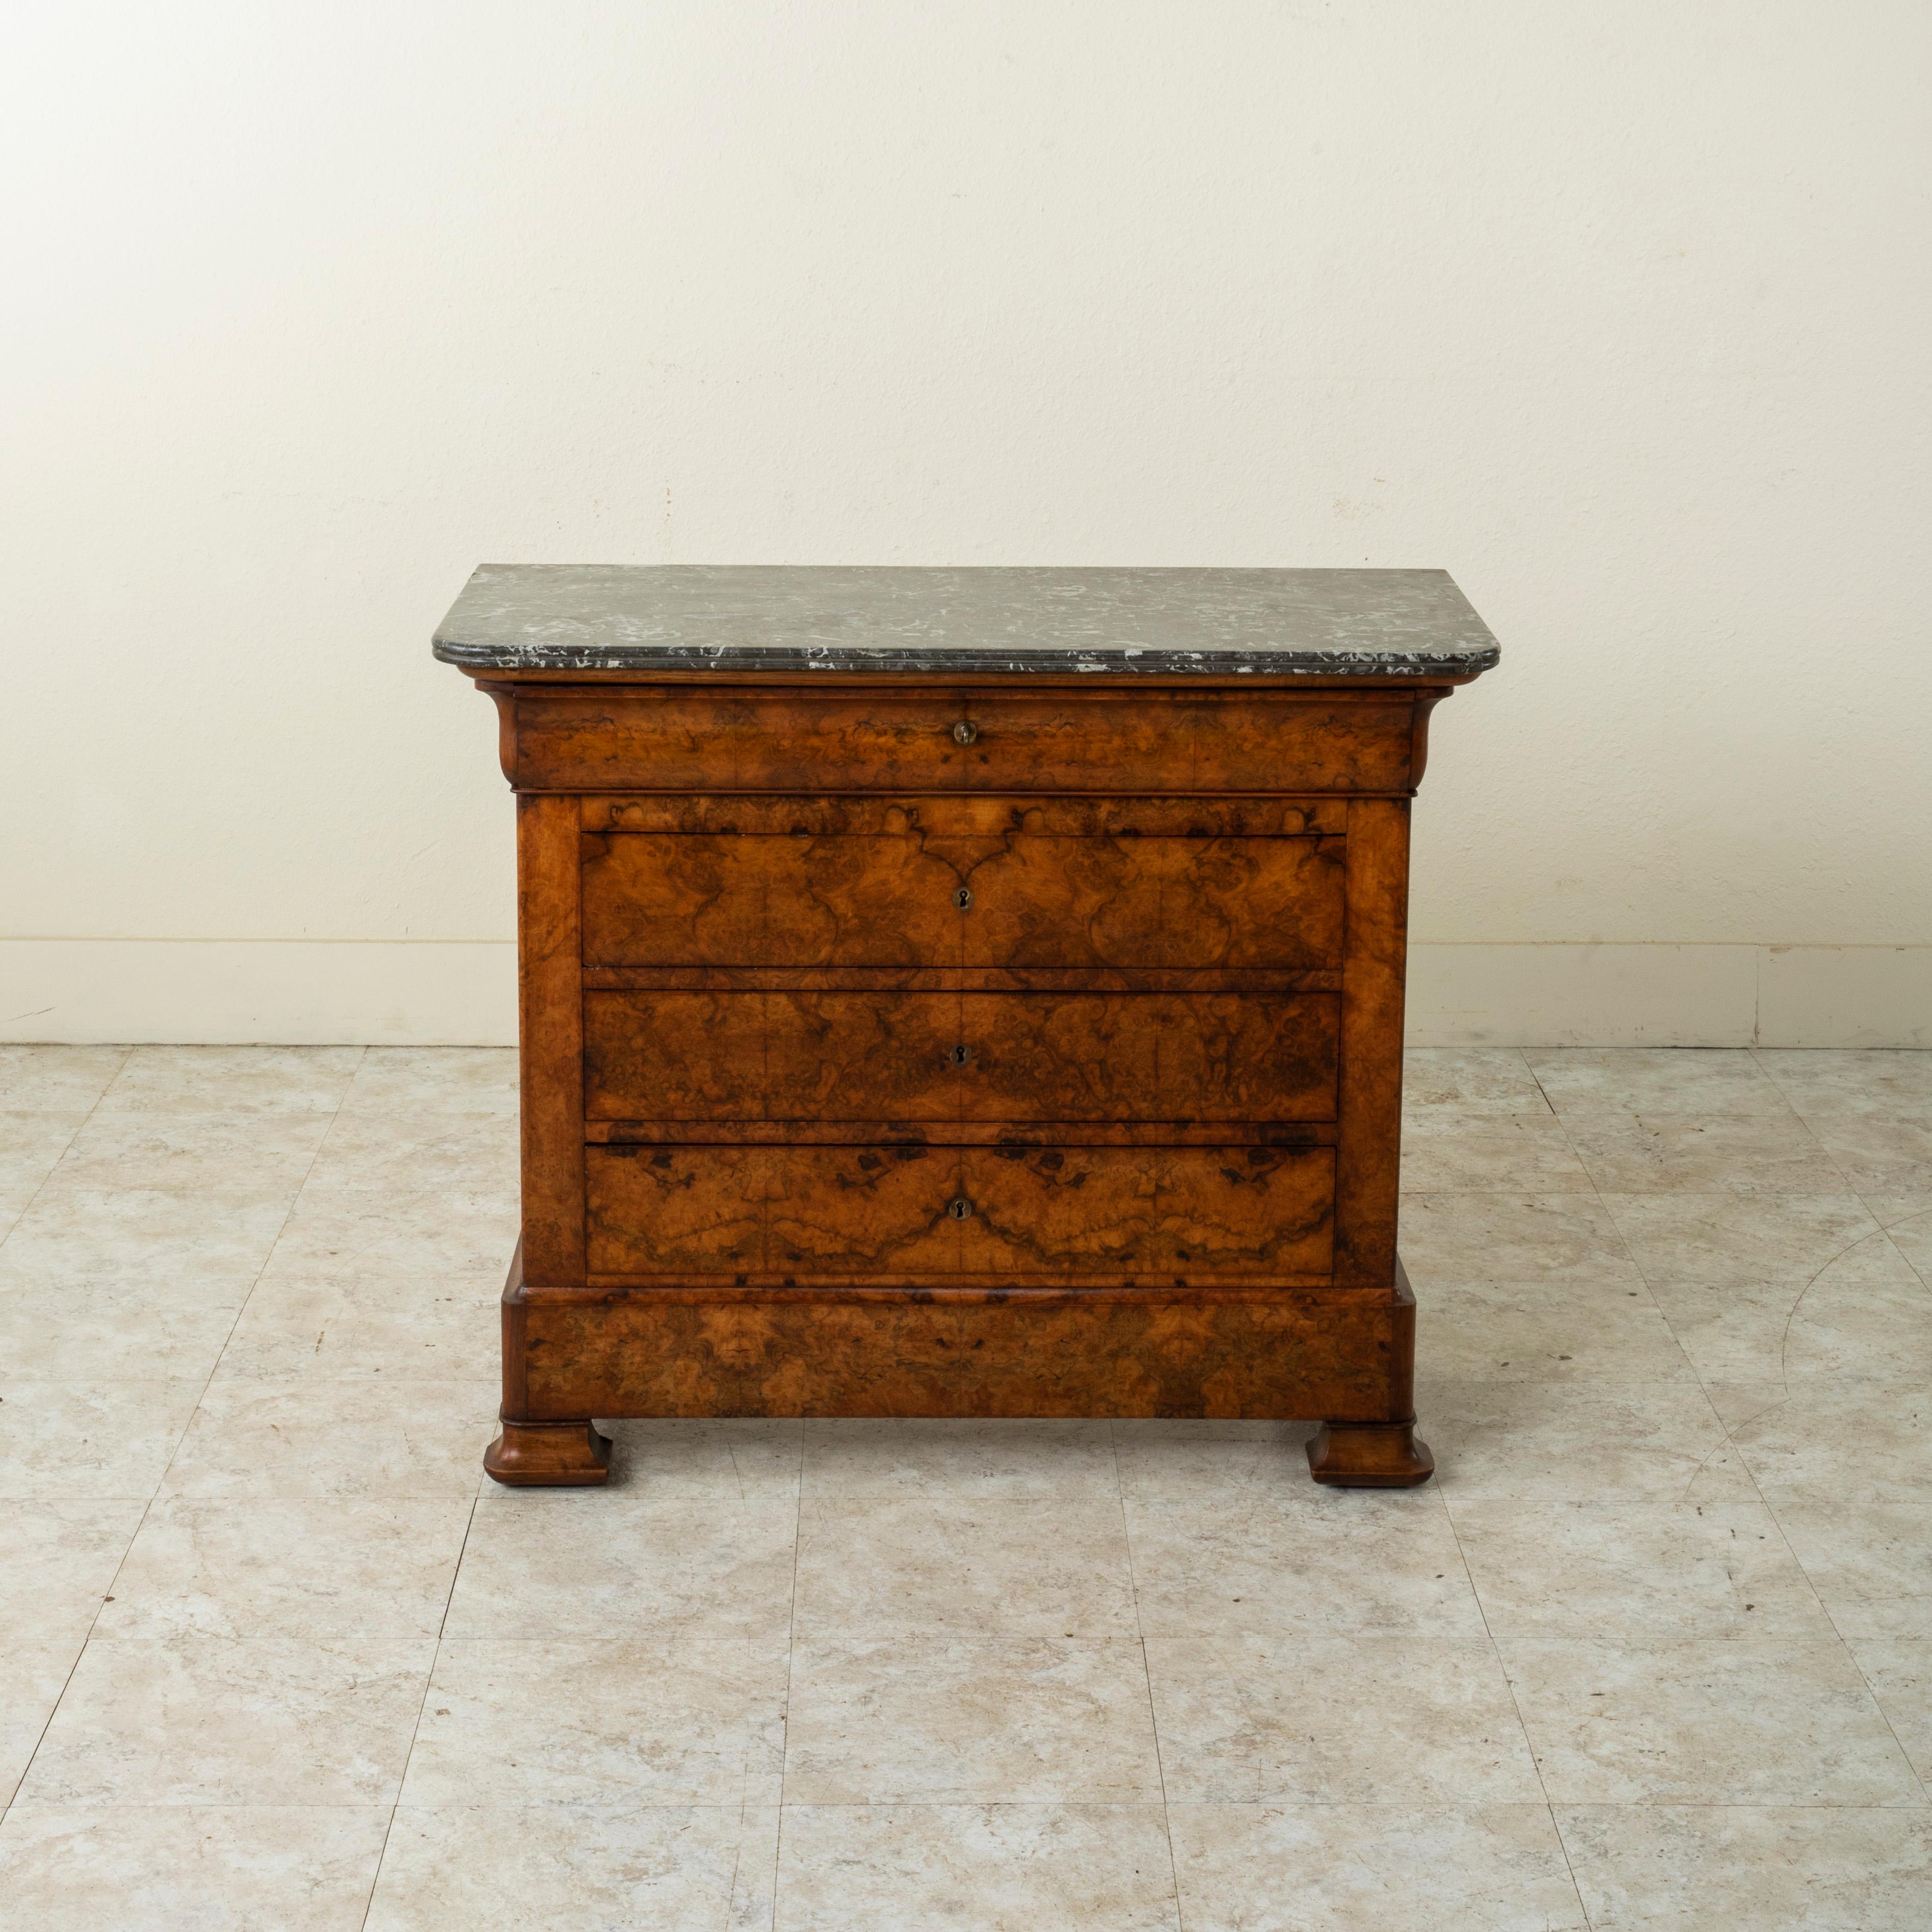 Rare for its smaller scale with a 38 inch width, this quintessential Louis Philippe period commode or chest of drawers displays the exemplary craftsmanship of the early 19th century with a facade of book matched walnut and solid walnut panel sides.